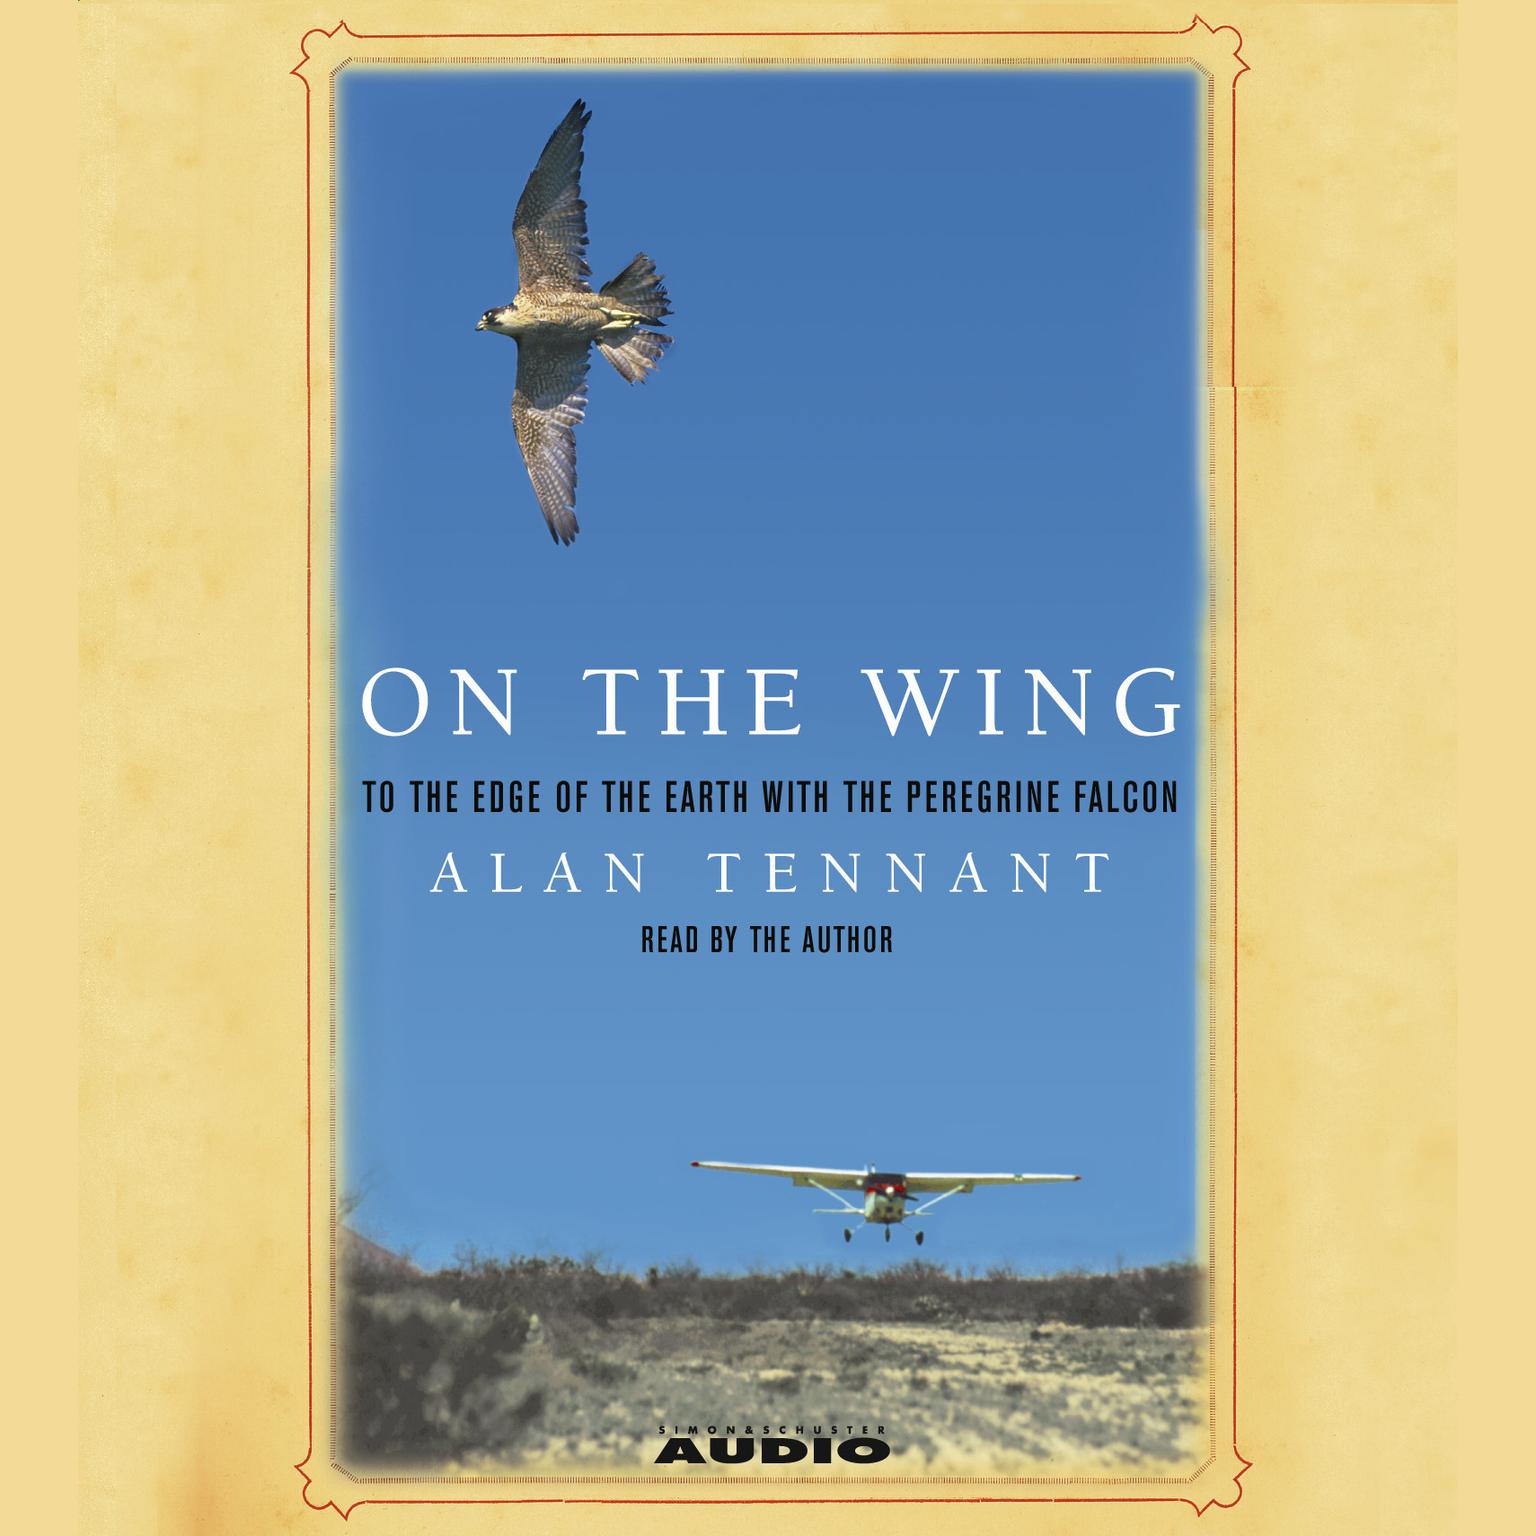 On the Wing (Abridged): To the Edge of the Earth with the Peregrine Falcon Audiobook, by Alan Tennant